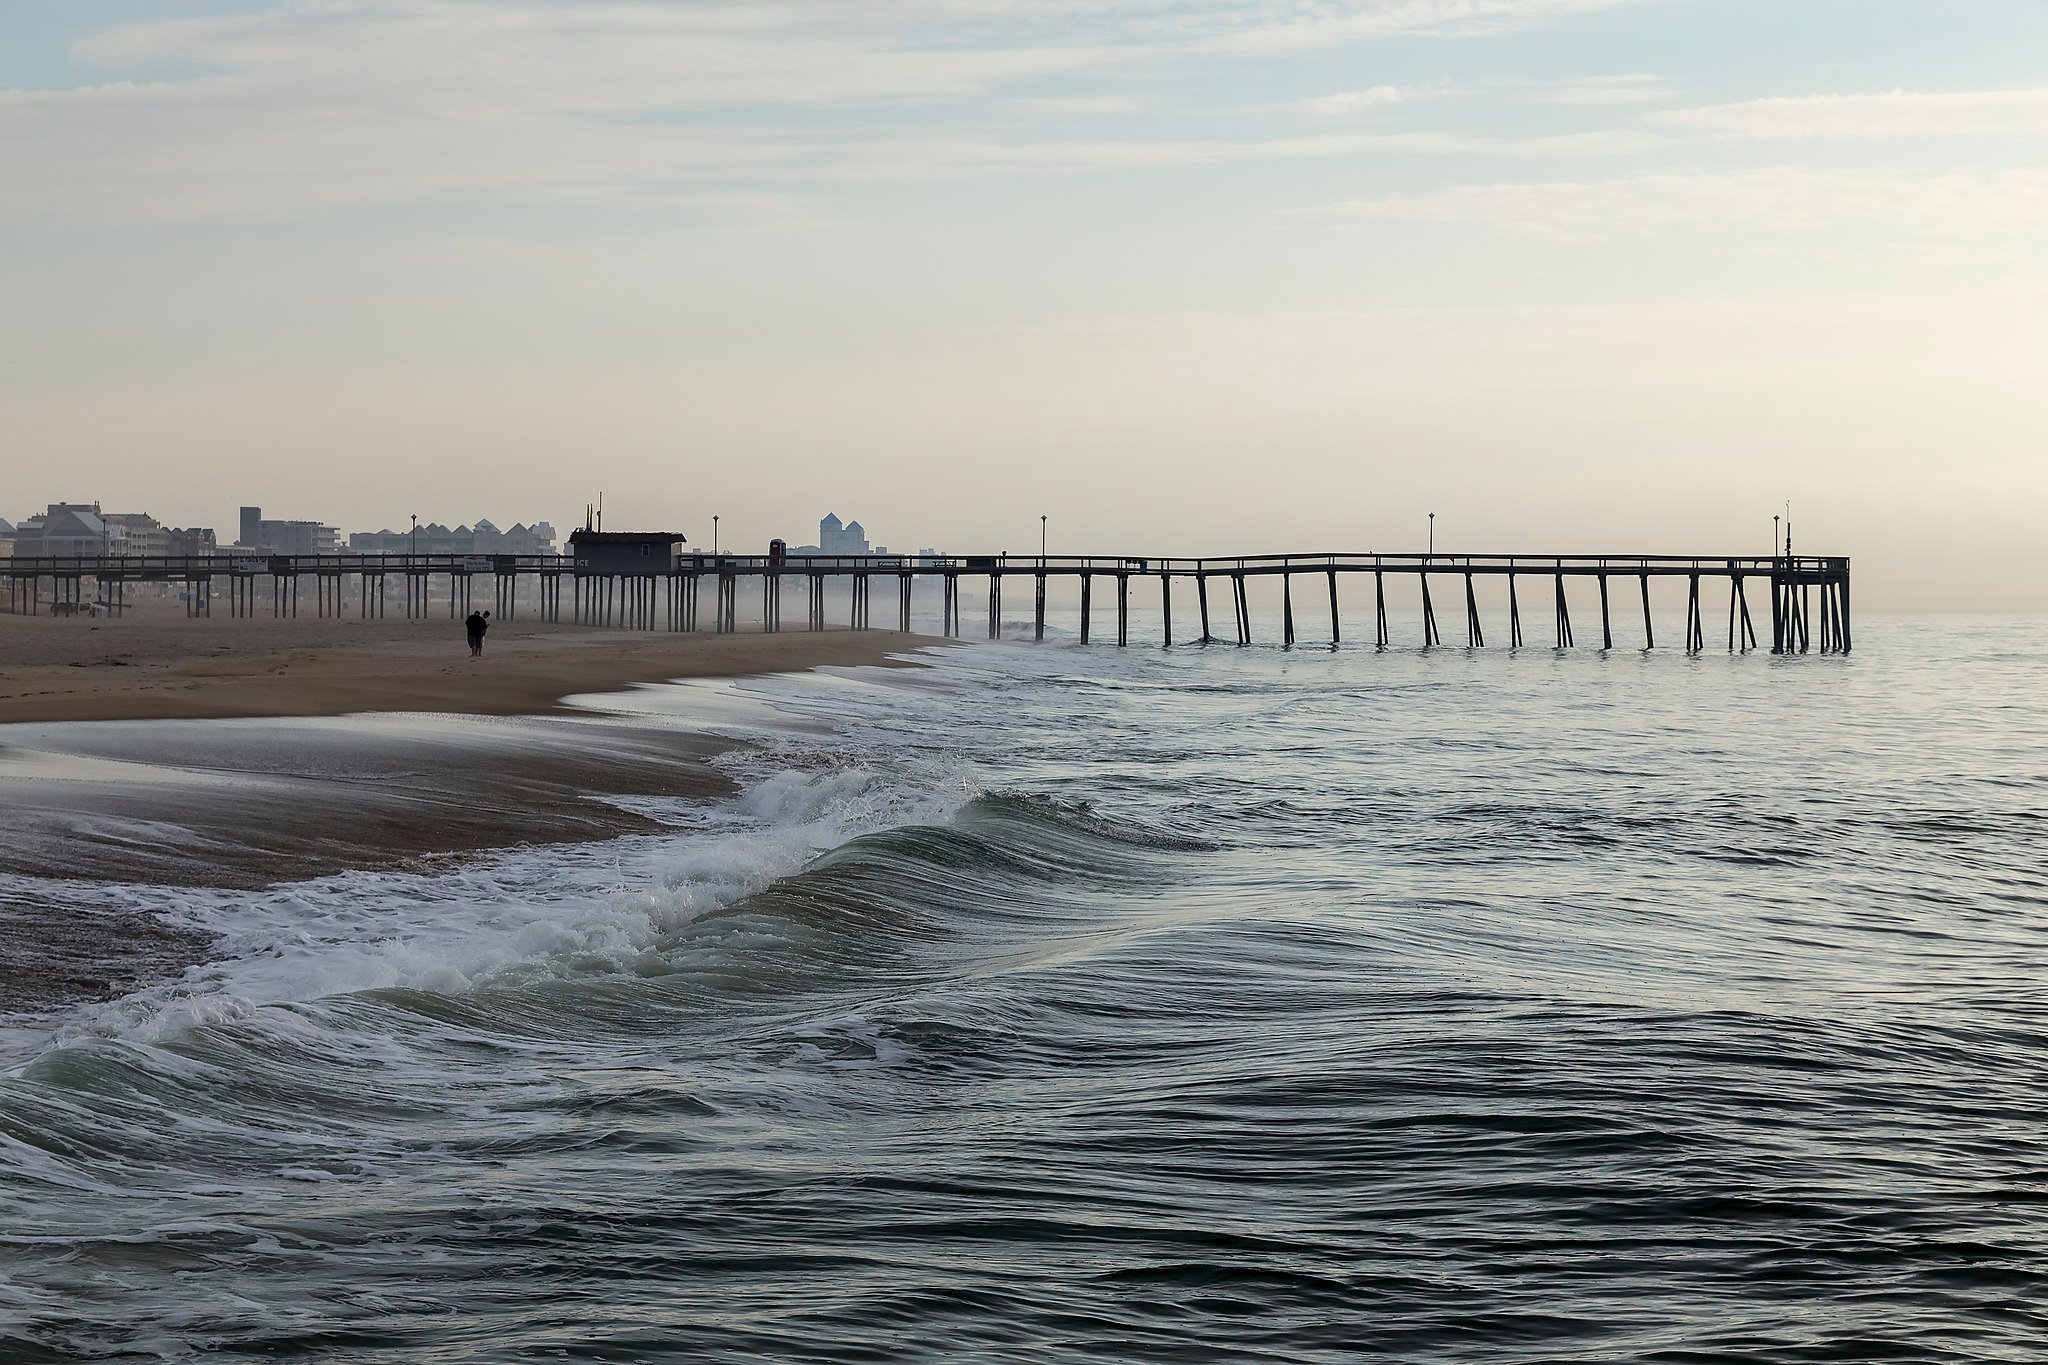 Ocean City fishing pier with waves in the foreground